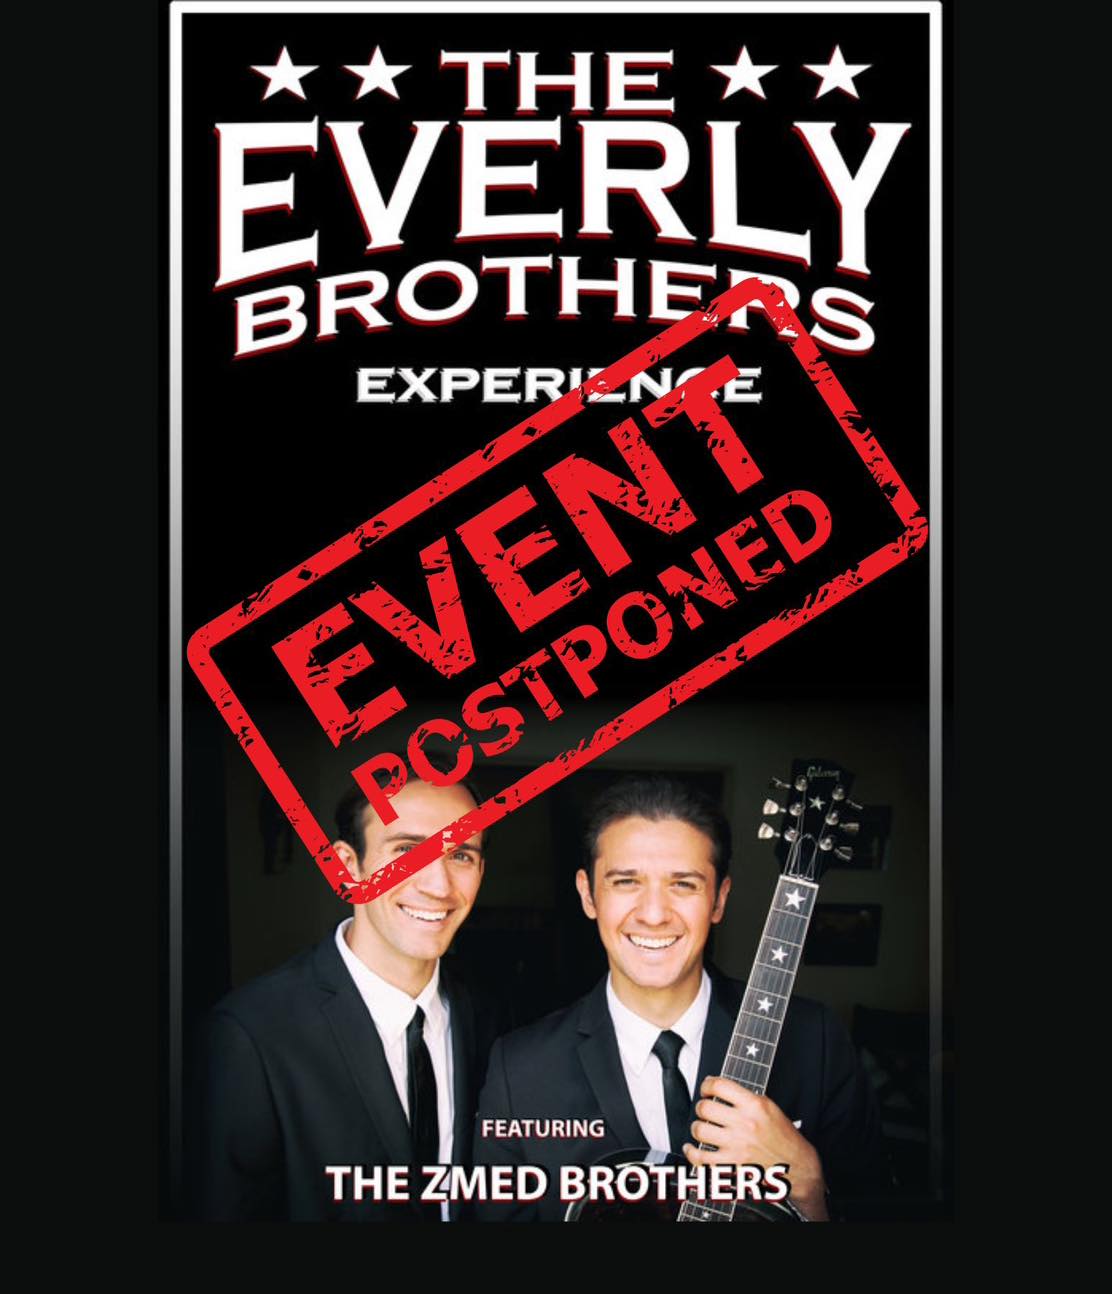 The Everly Brothers Experience Featuring the ZMed Brothers - POSTPONED